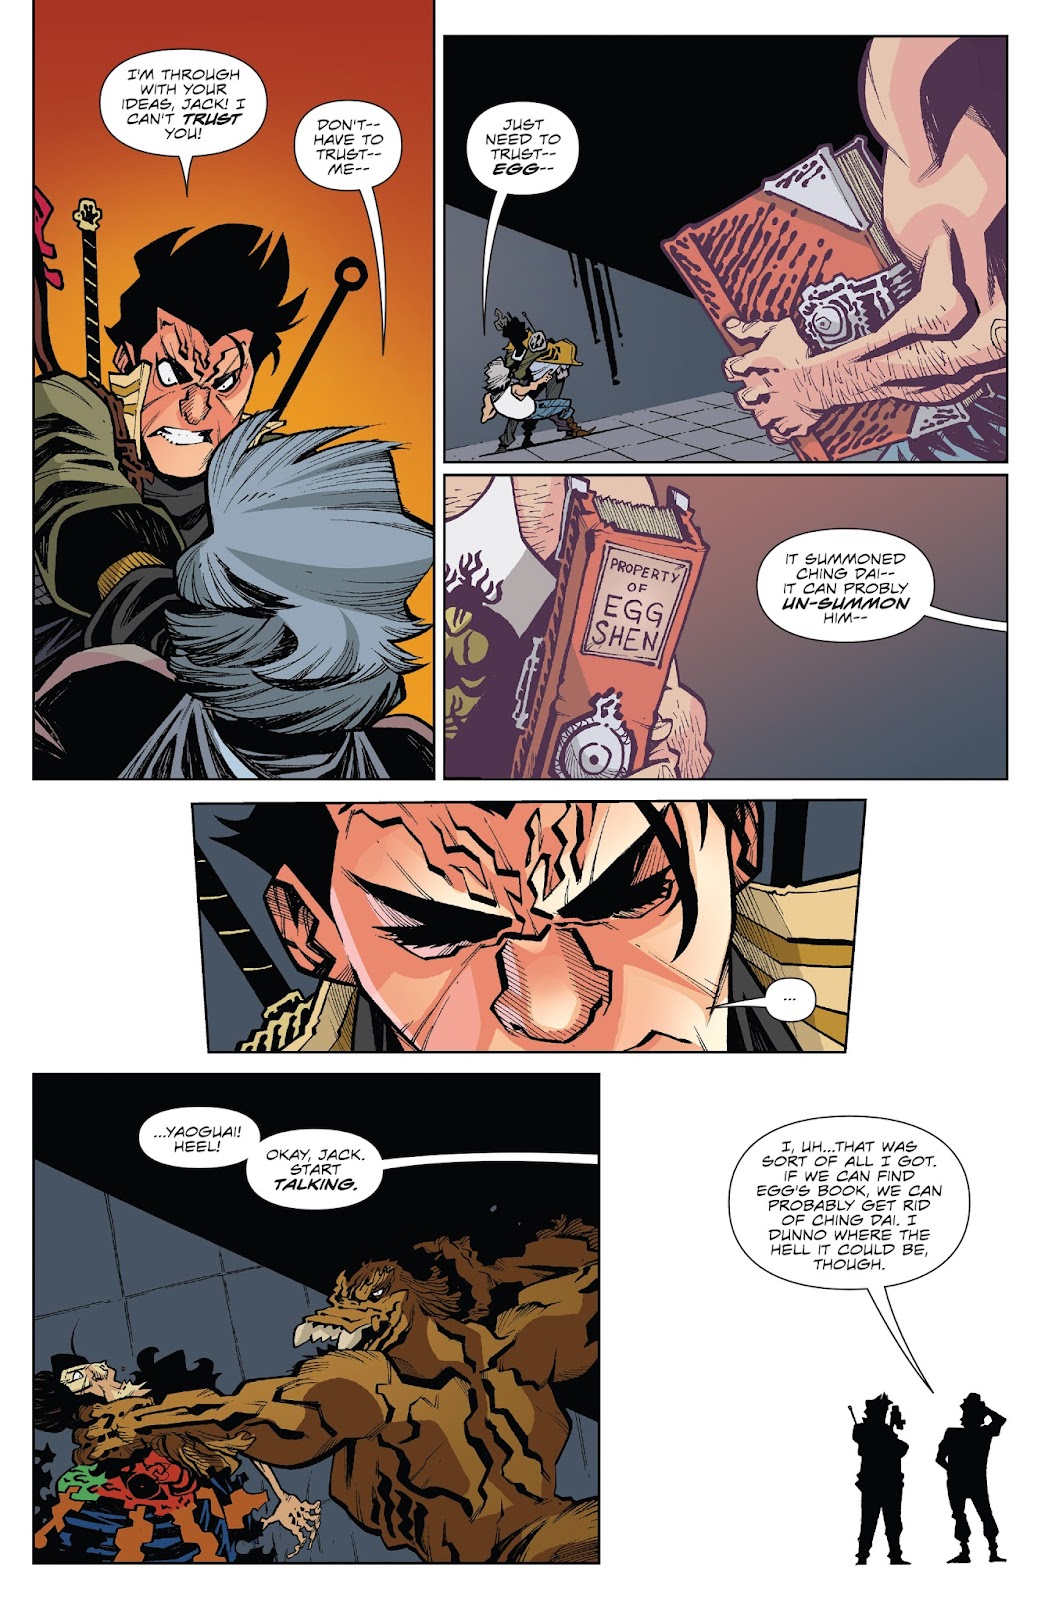 Big Trouble in Little China: Old Man Jack issue 6 - Page 22